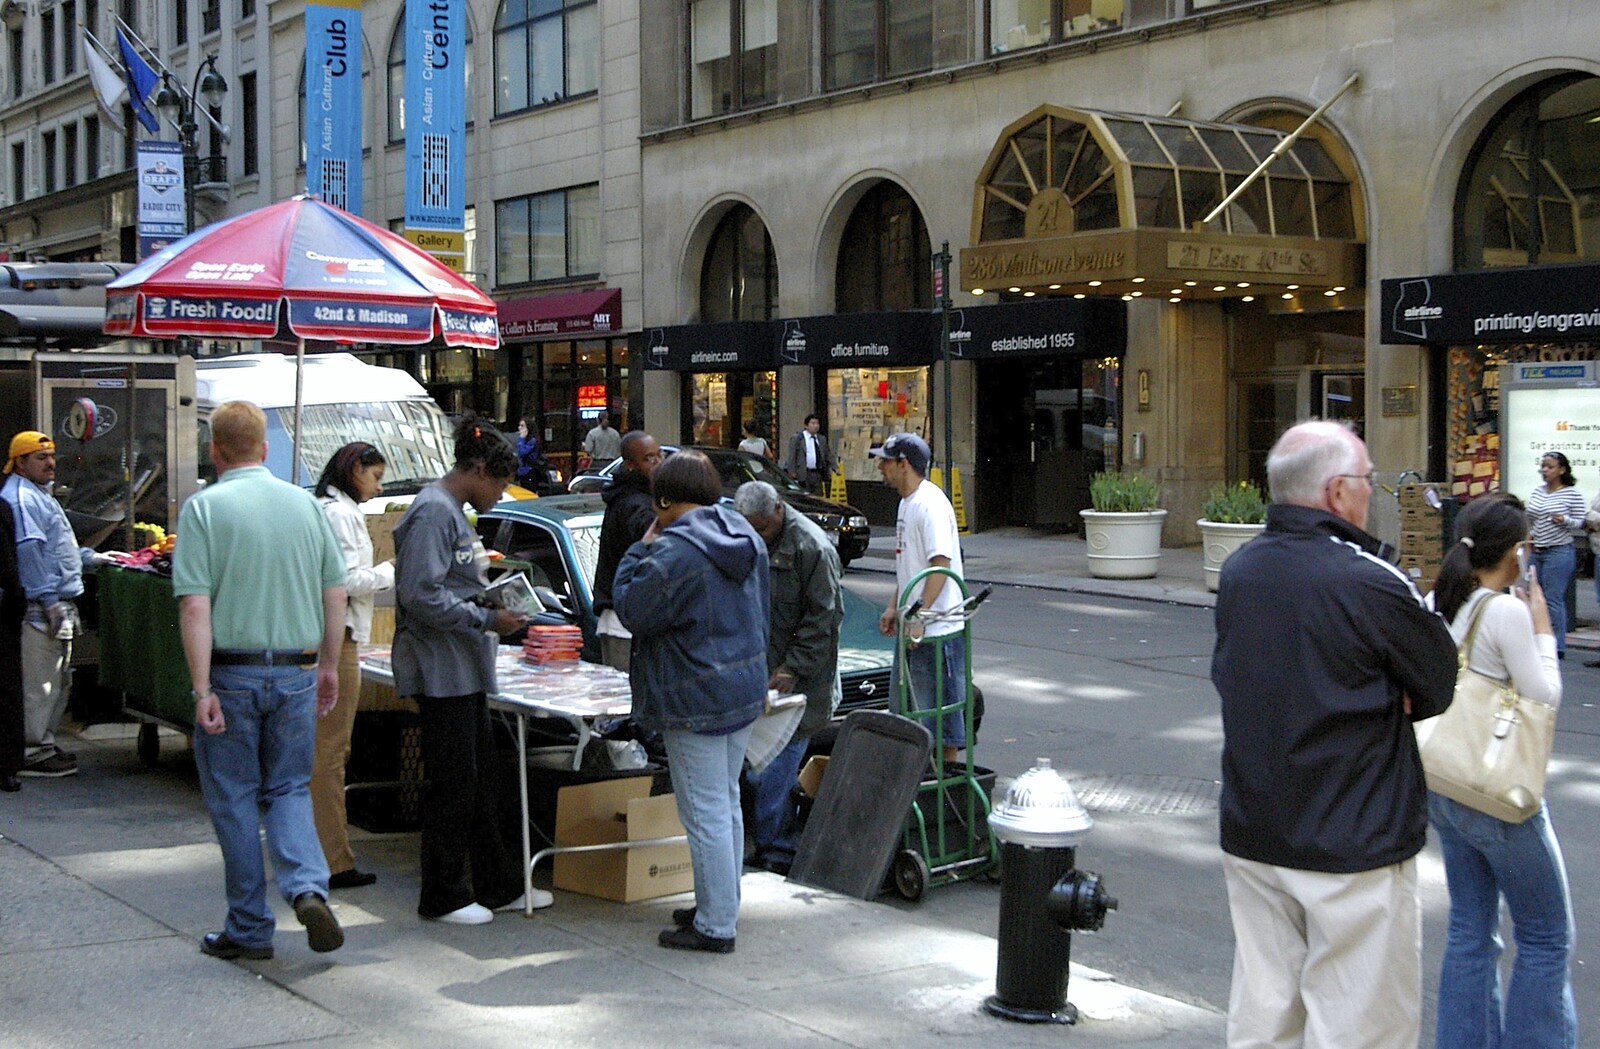 Food stalls in mid-town somewhere from Times Square, the Empire State and Ground Zero, New York, US - 1st May 2006